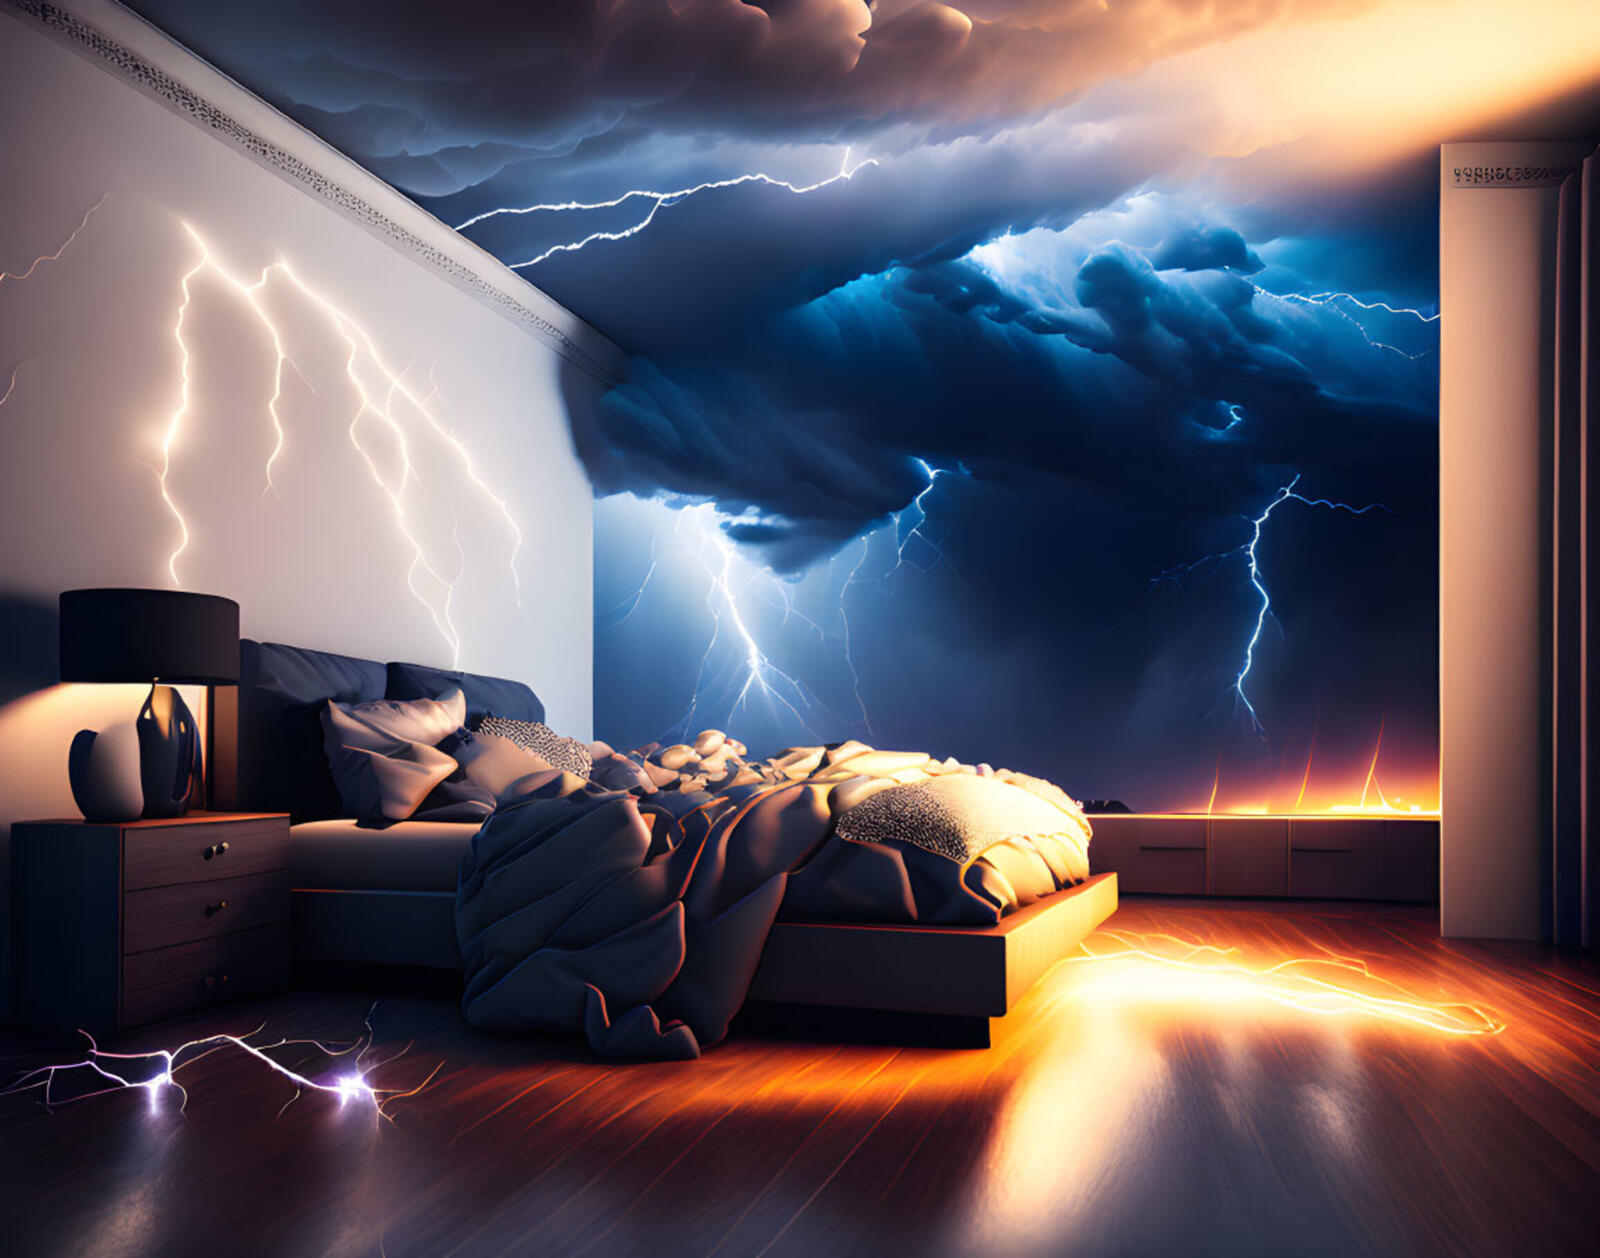 Free photo A large bedroom with dark storm clouds